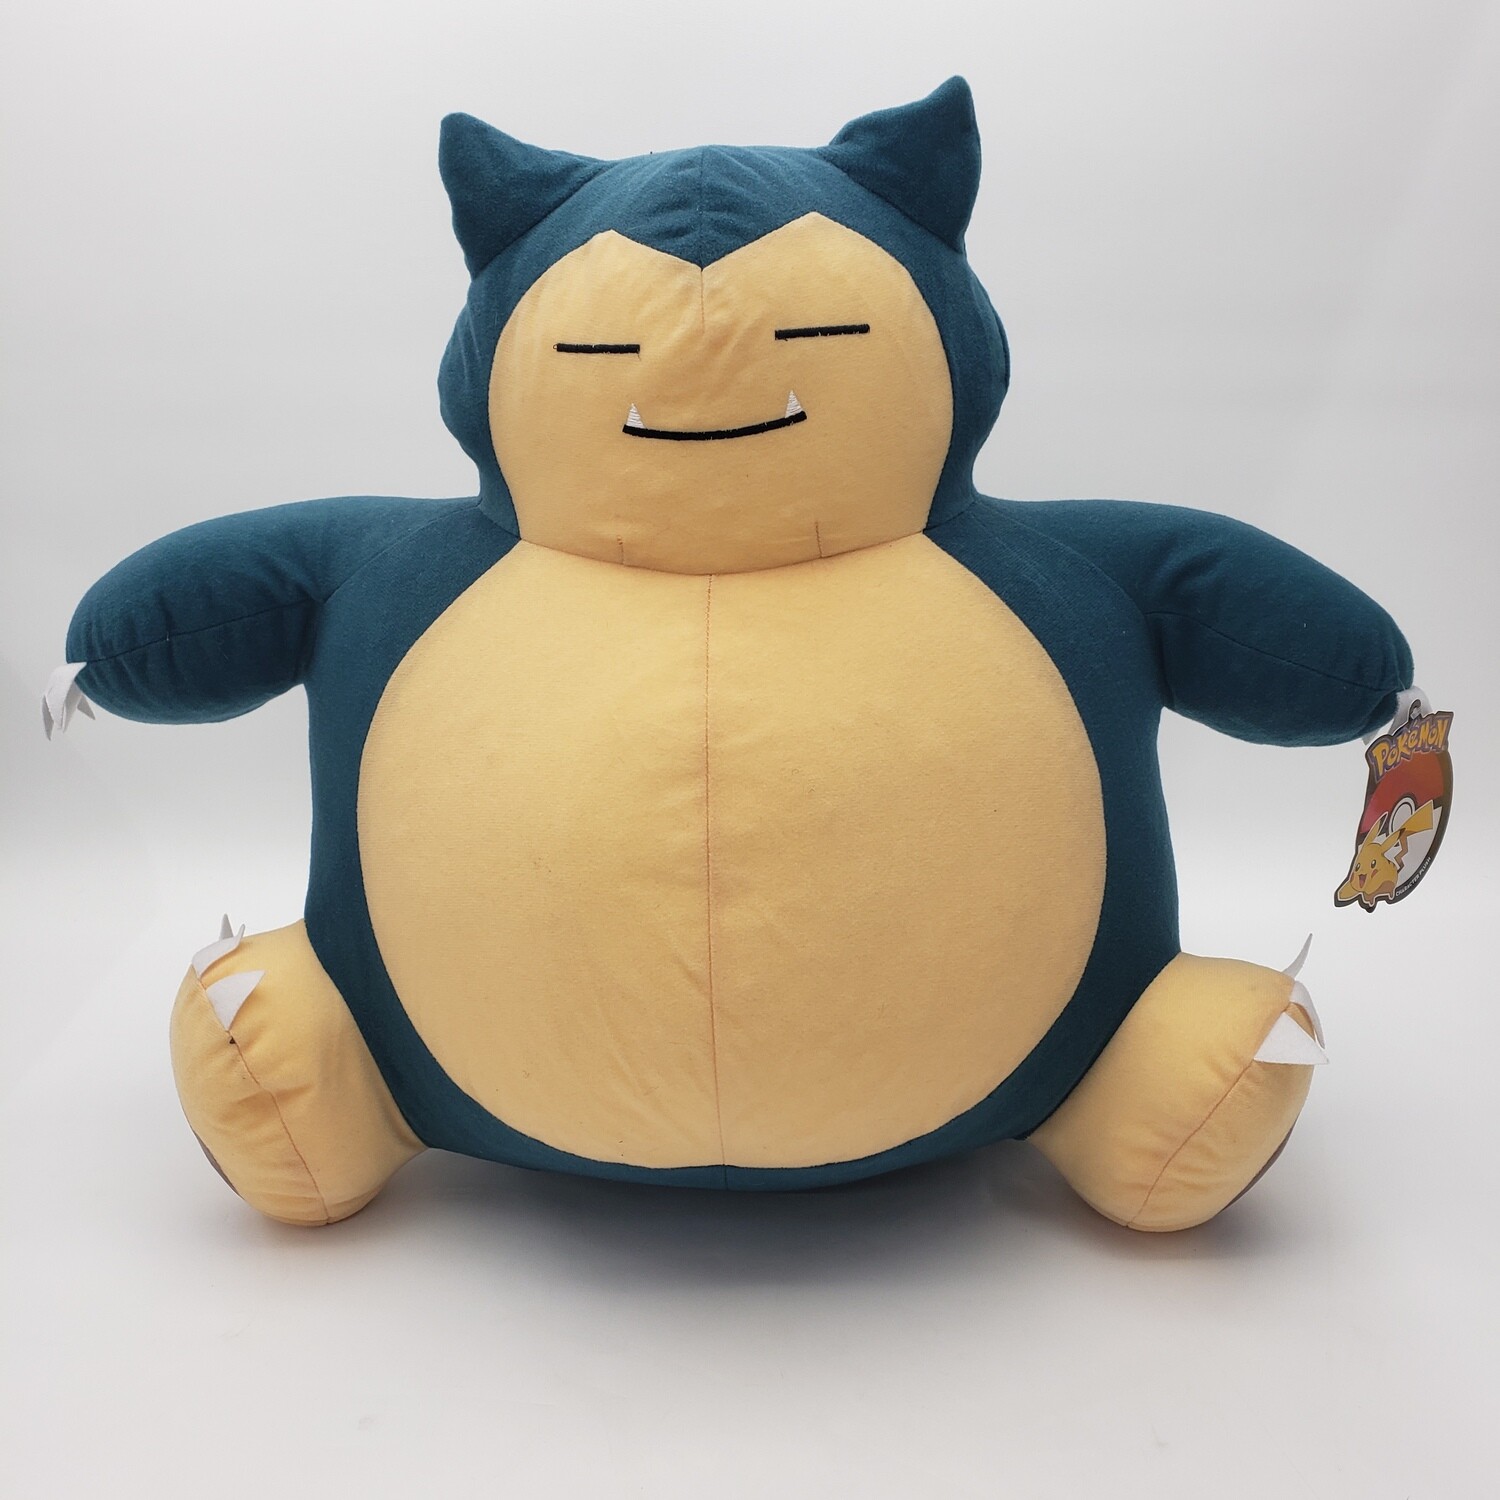 Pokemon 17" Snorlax Plush Toy by Toy Factory - New